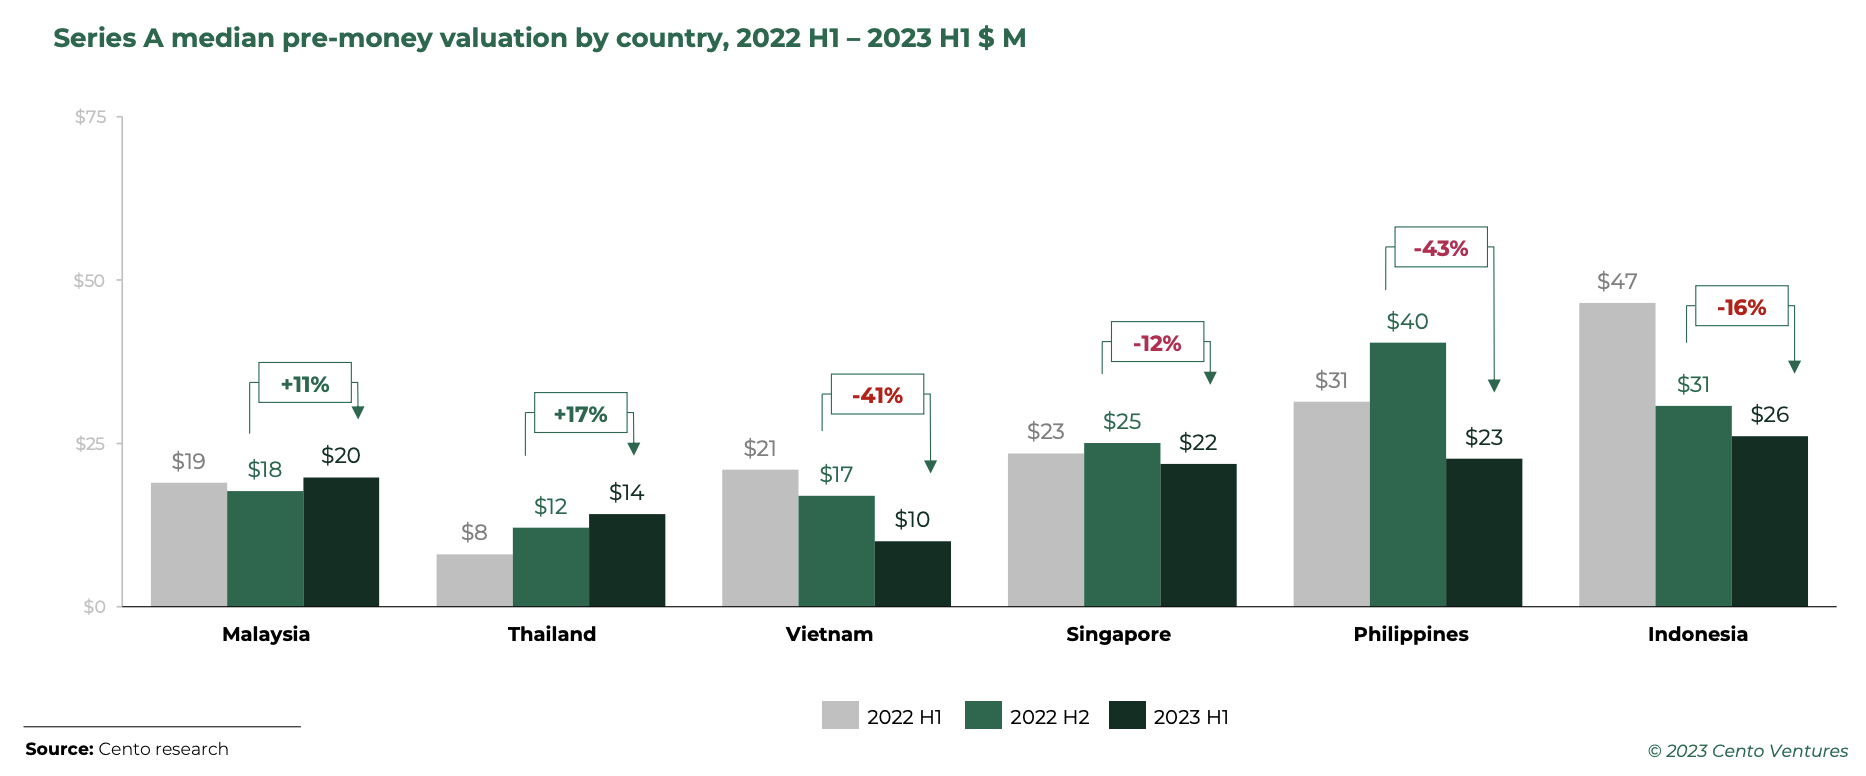 Series A median pre-money valuation by country, 2022 H1 – 2023 H1 US$ million, Source: Southeast Asia Tech Investment 2023 H1, Cento Ventures, Dec 2023